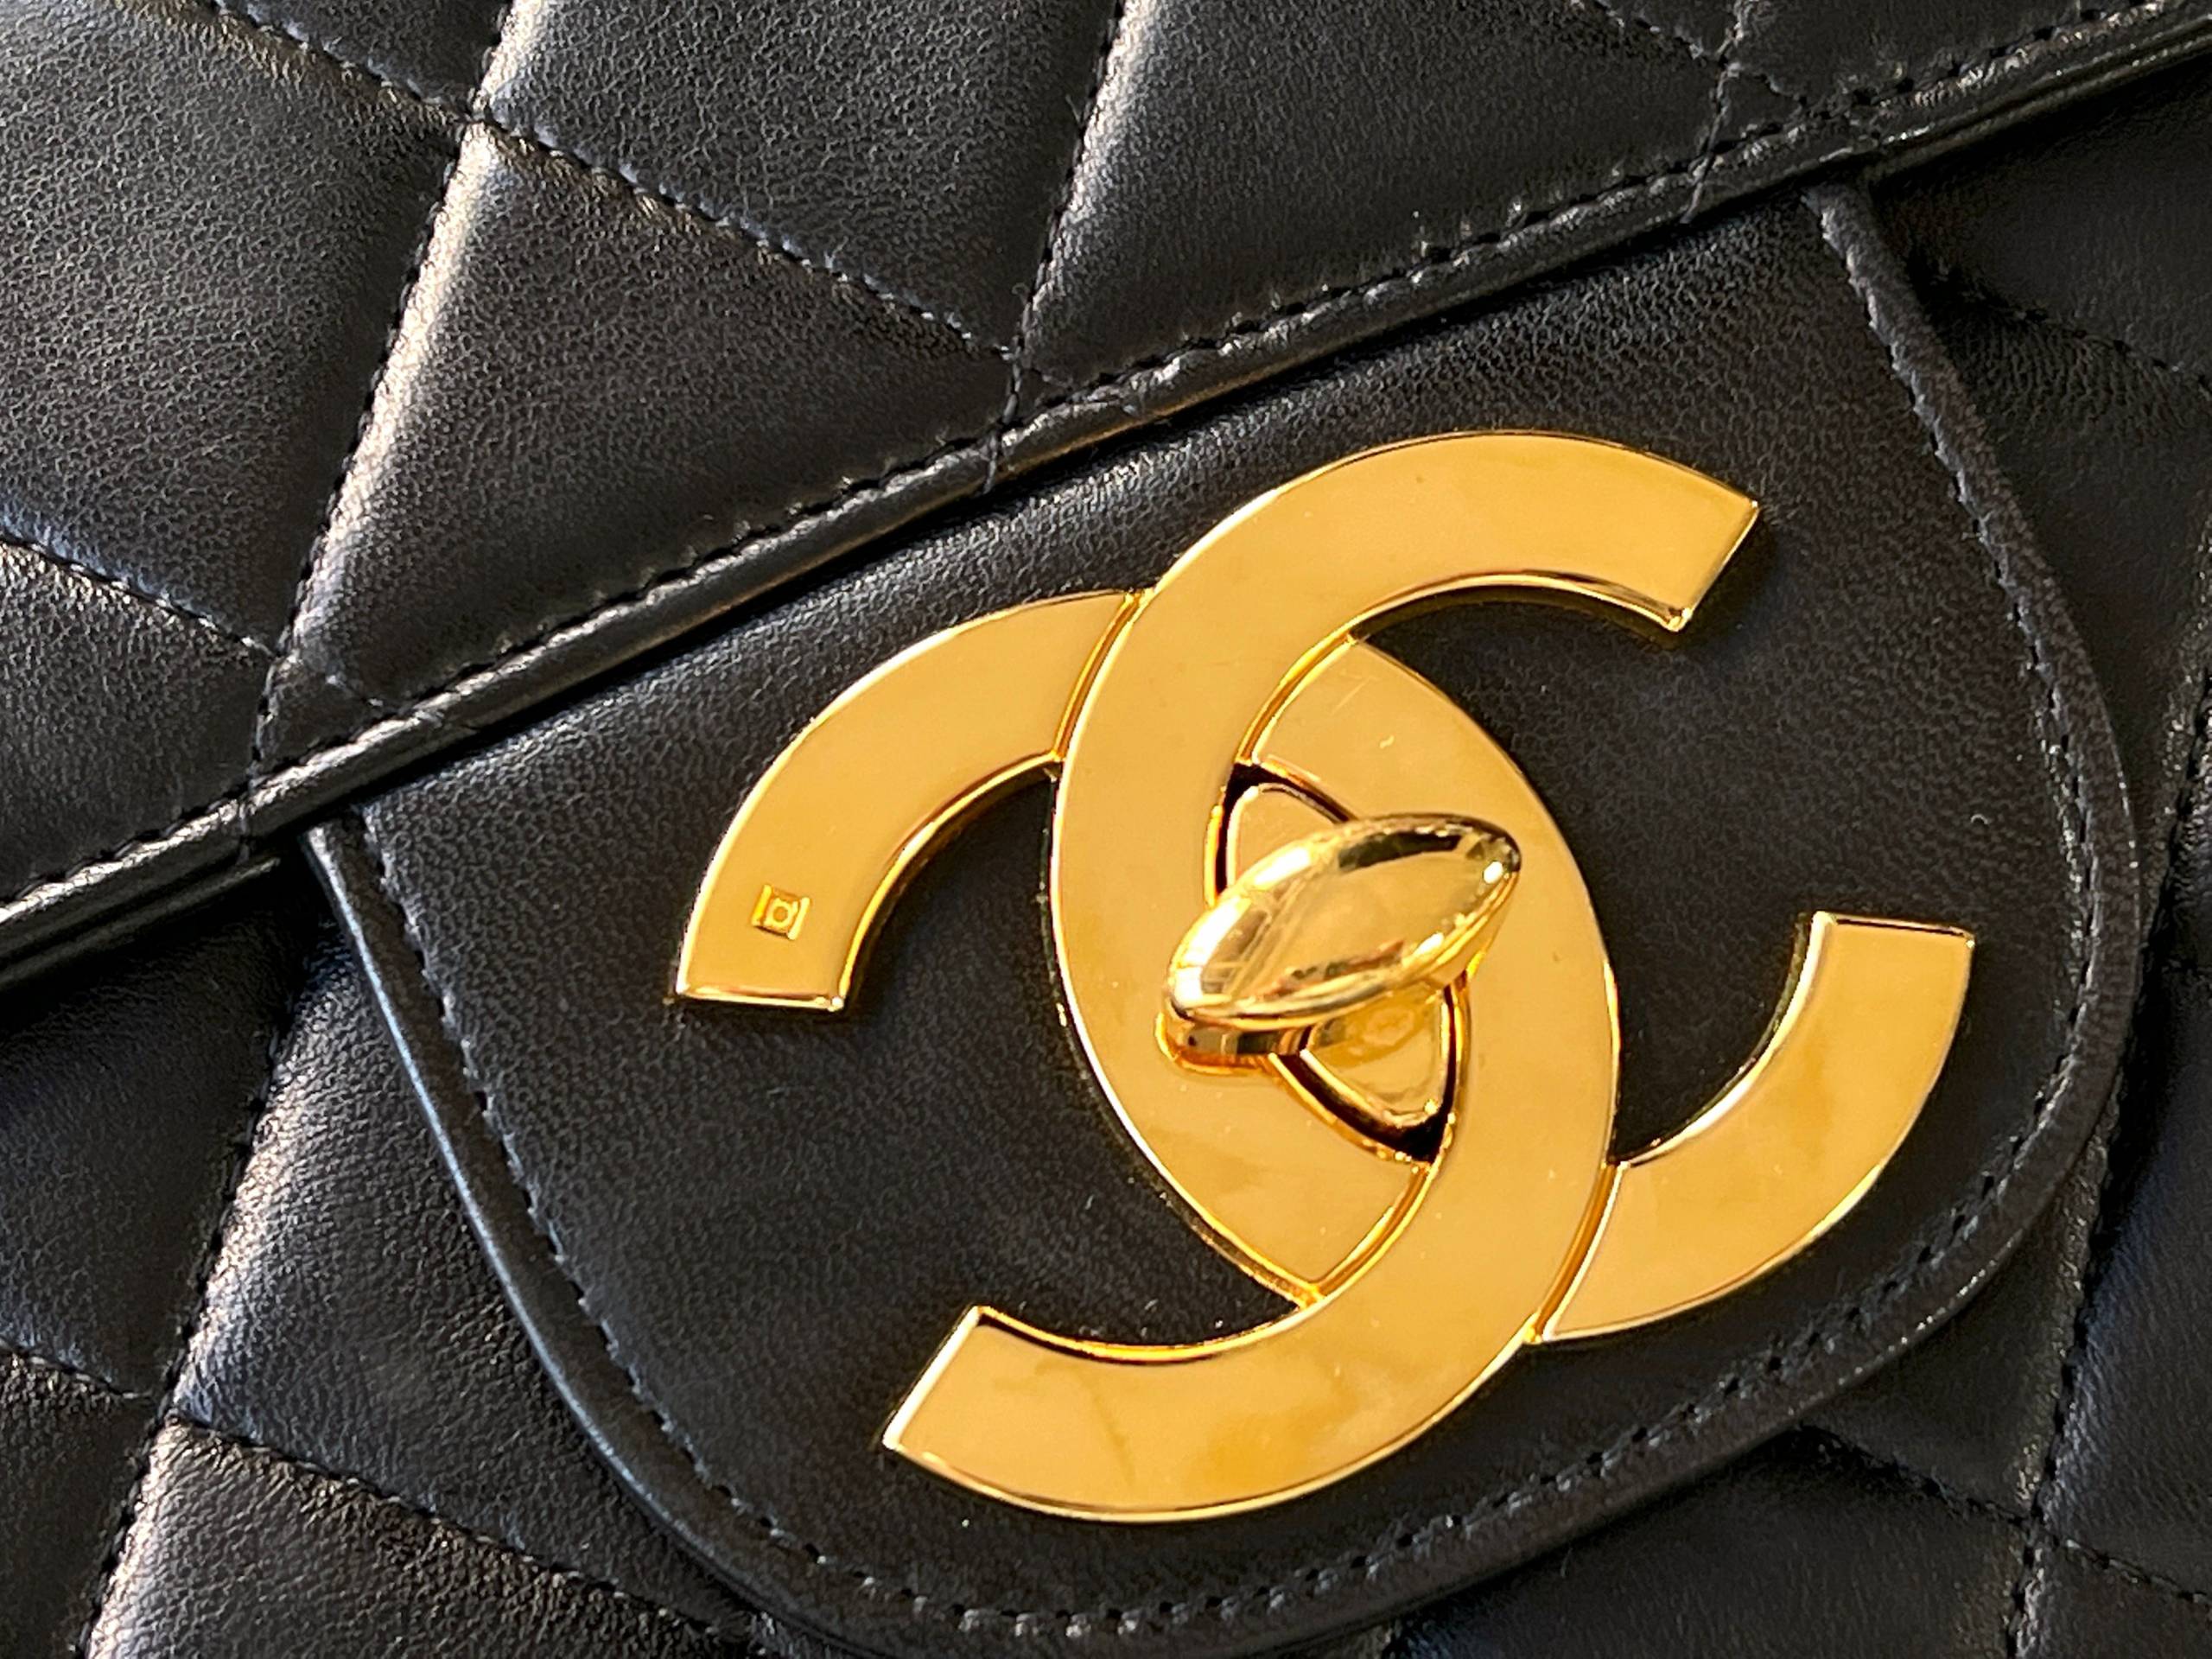 Is This the New Chanel Bag We're Going to See Everywhere?